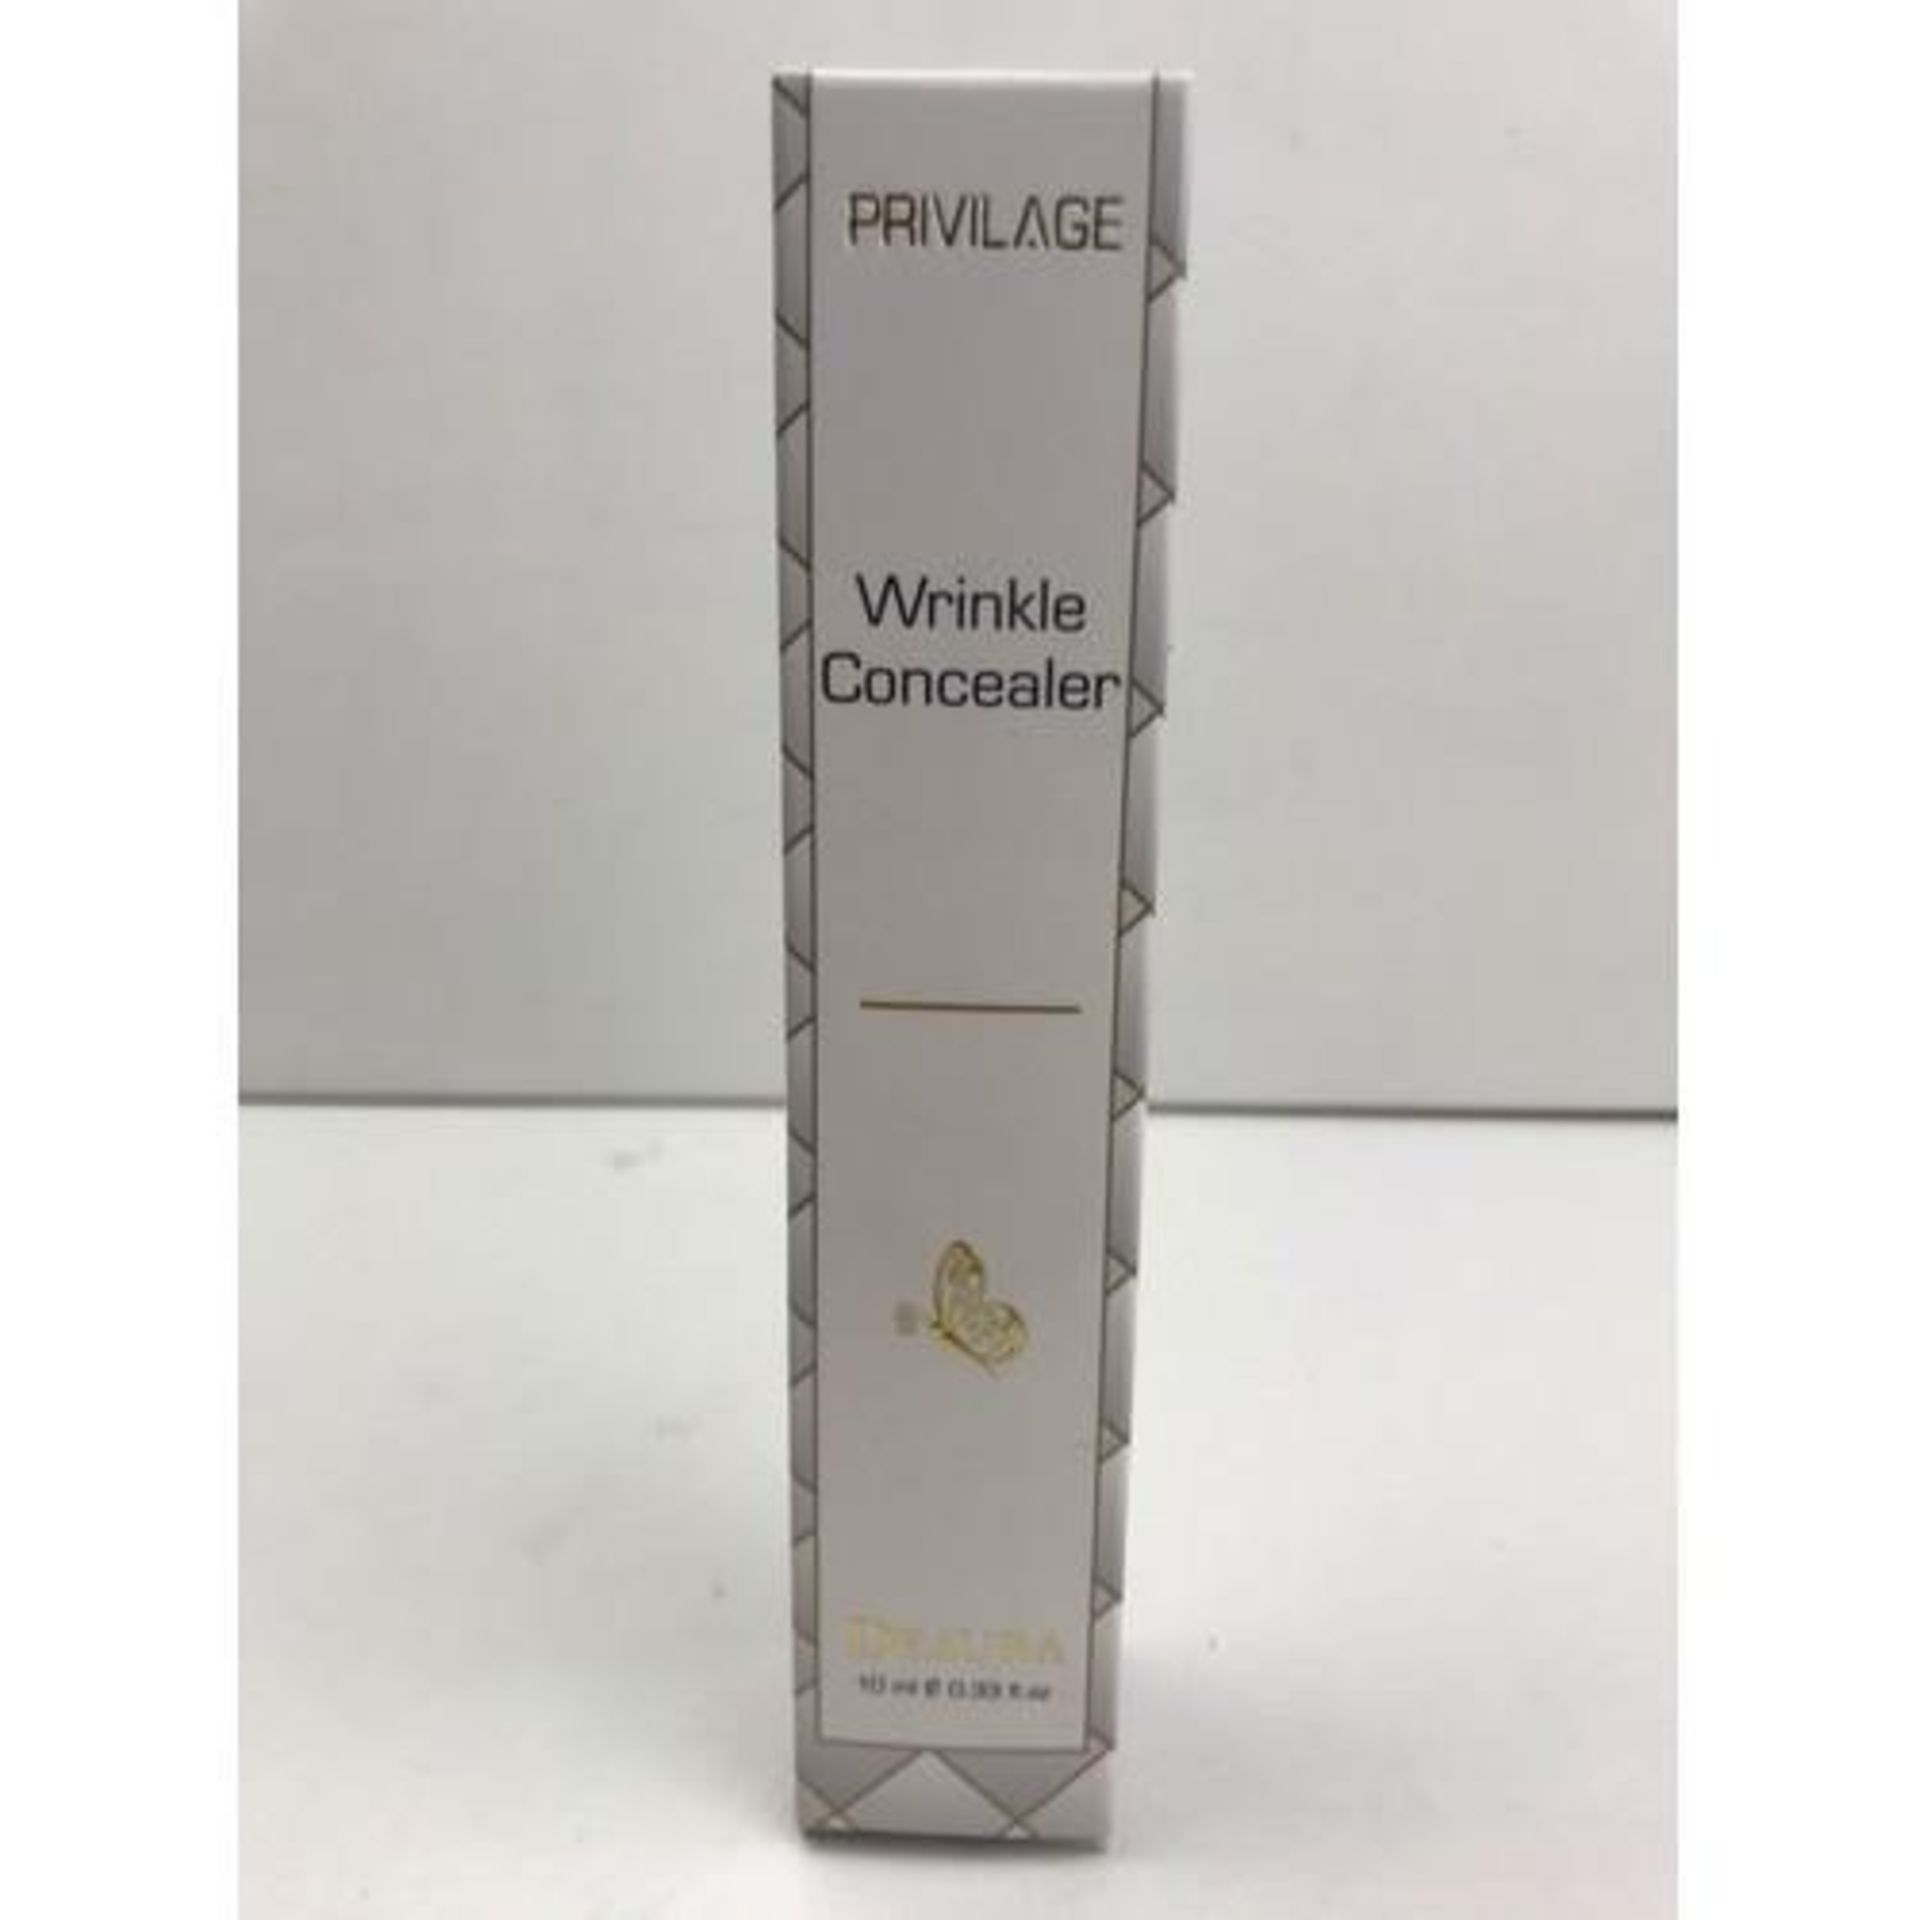 GRADE A- BOXED BRAND NEW PRIVILAGE WRINKLE CONCEALER BY DEAURA, 10ML BOTTLE, RRP-£45.00Condition